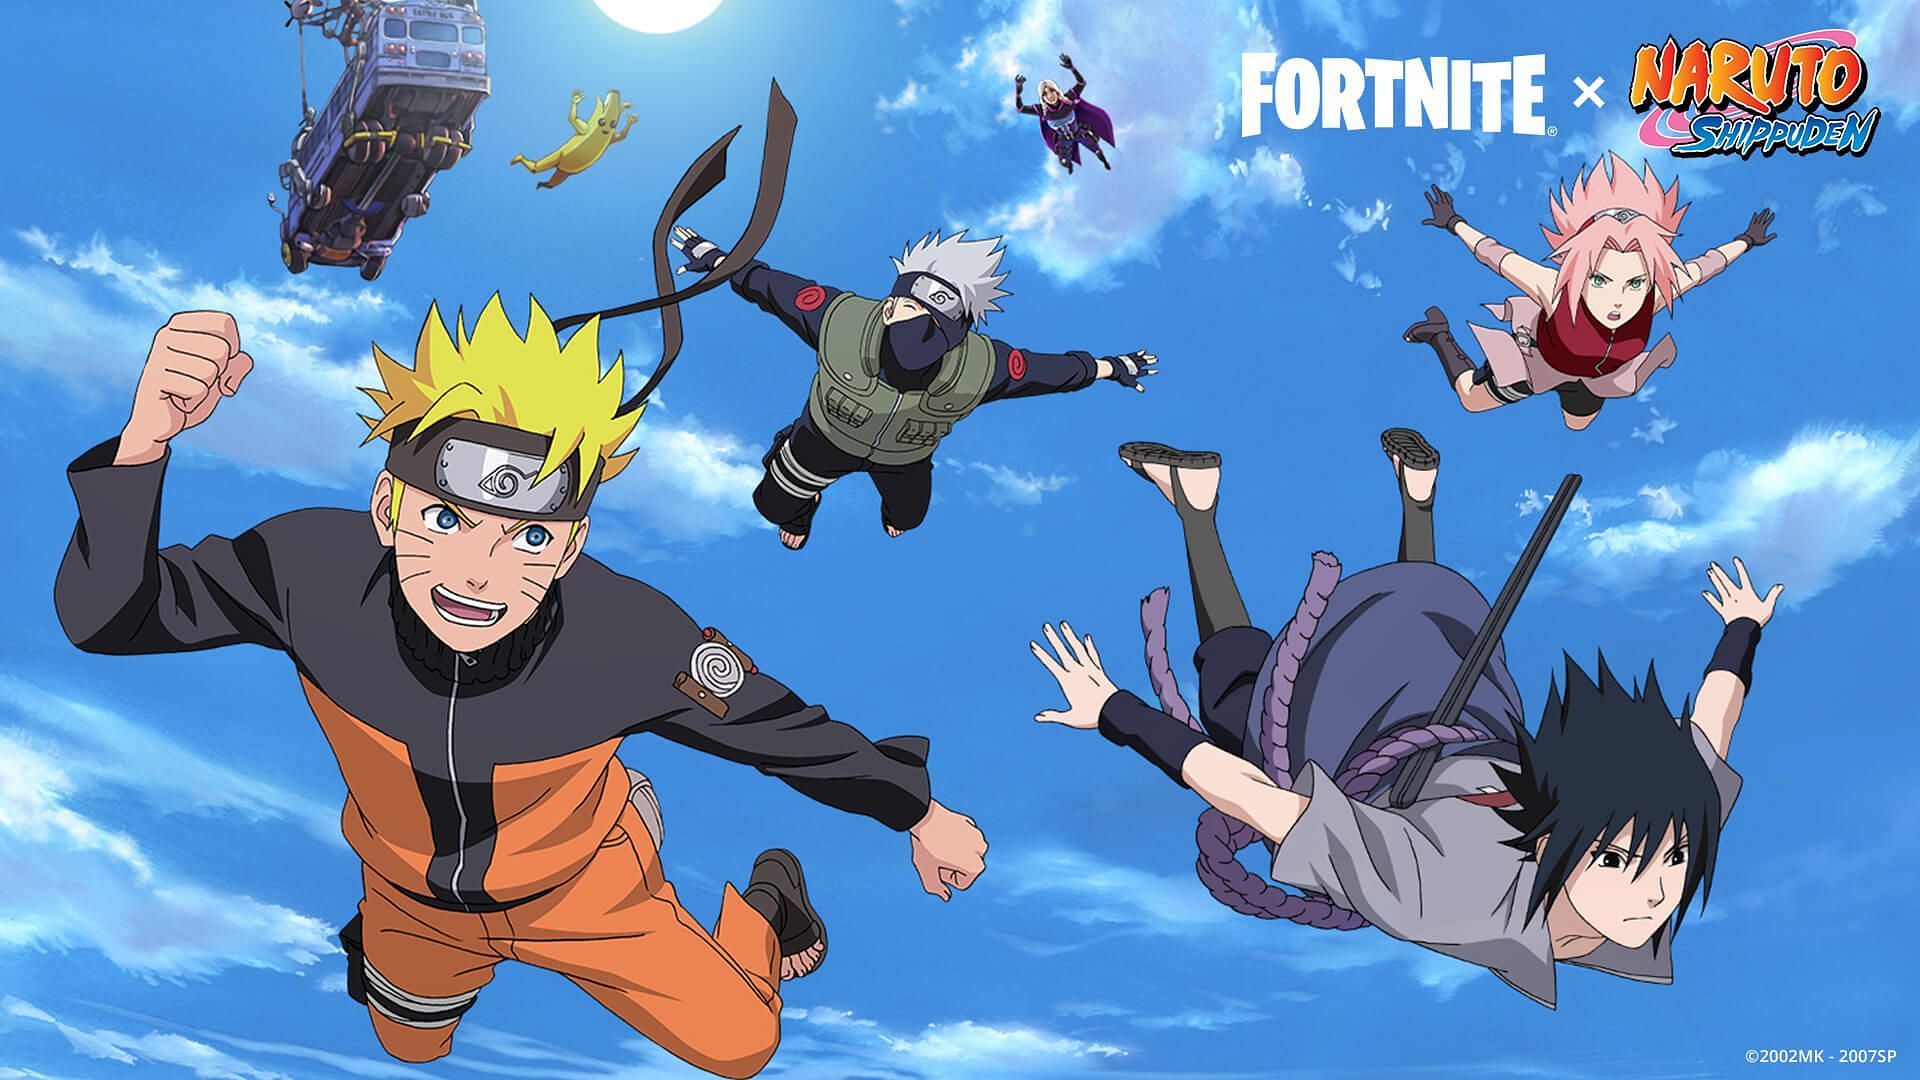 The Naruto collab was a huge success (Image via Epic Games)